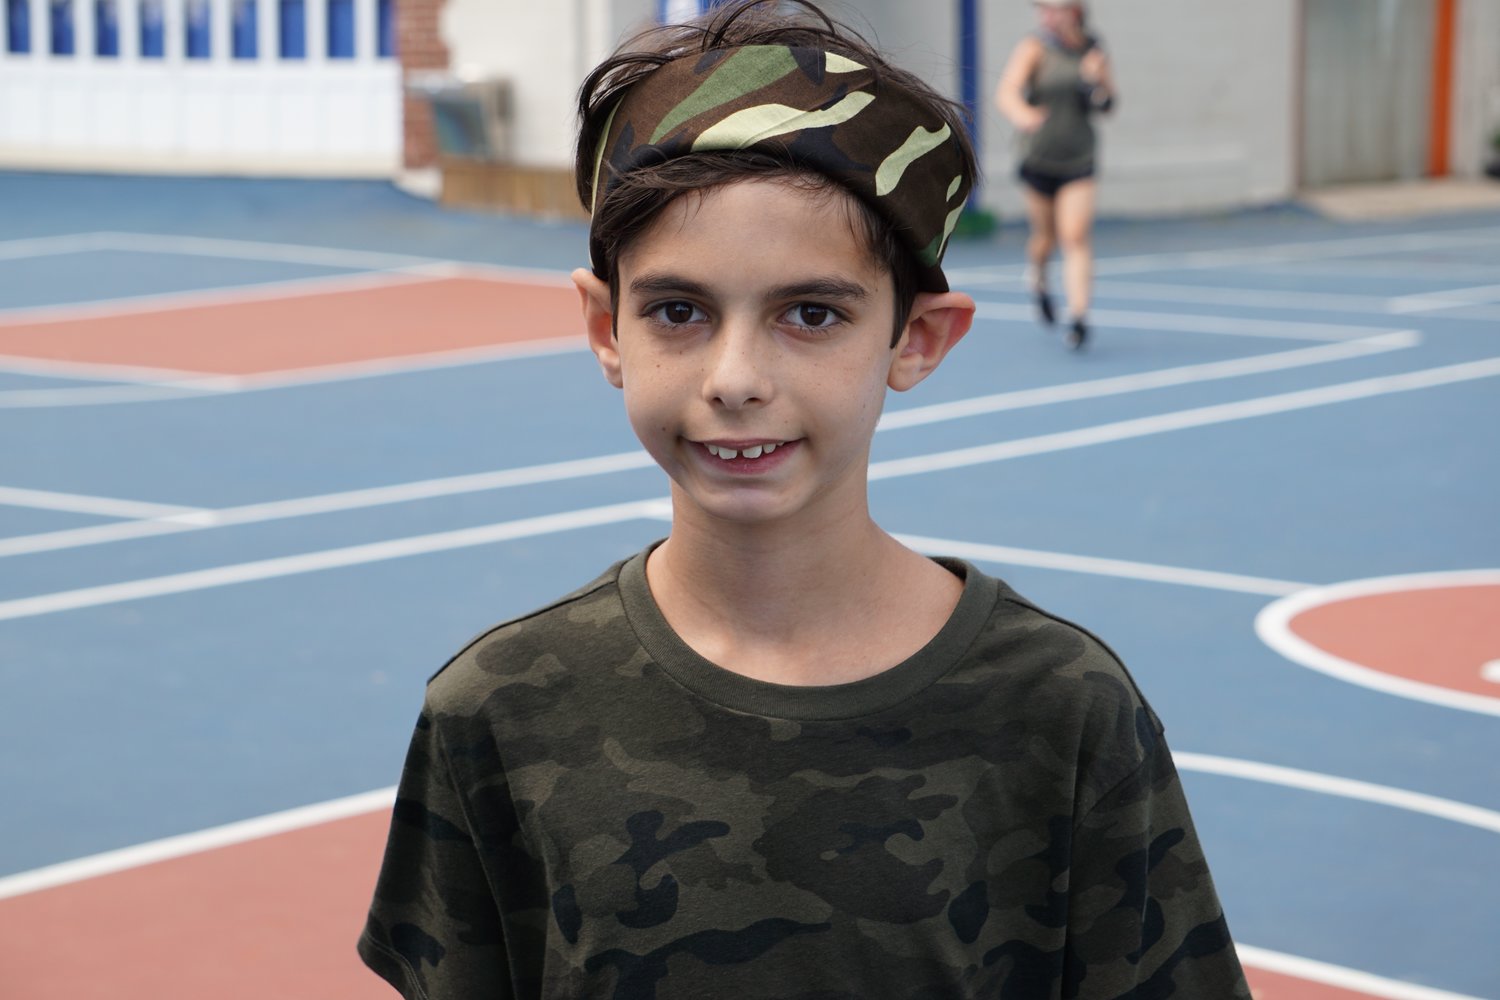 Ryan Steiner, 10, enjoyed basketball, as his favorite activity to do at Rolling River Day Camp.